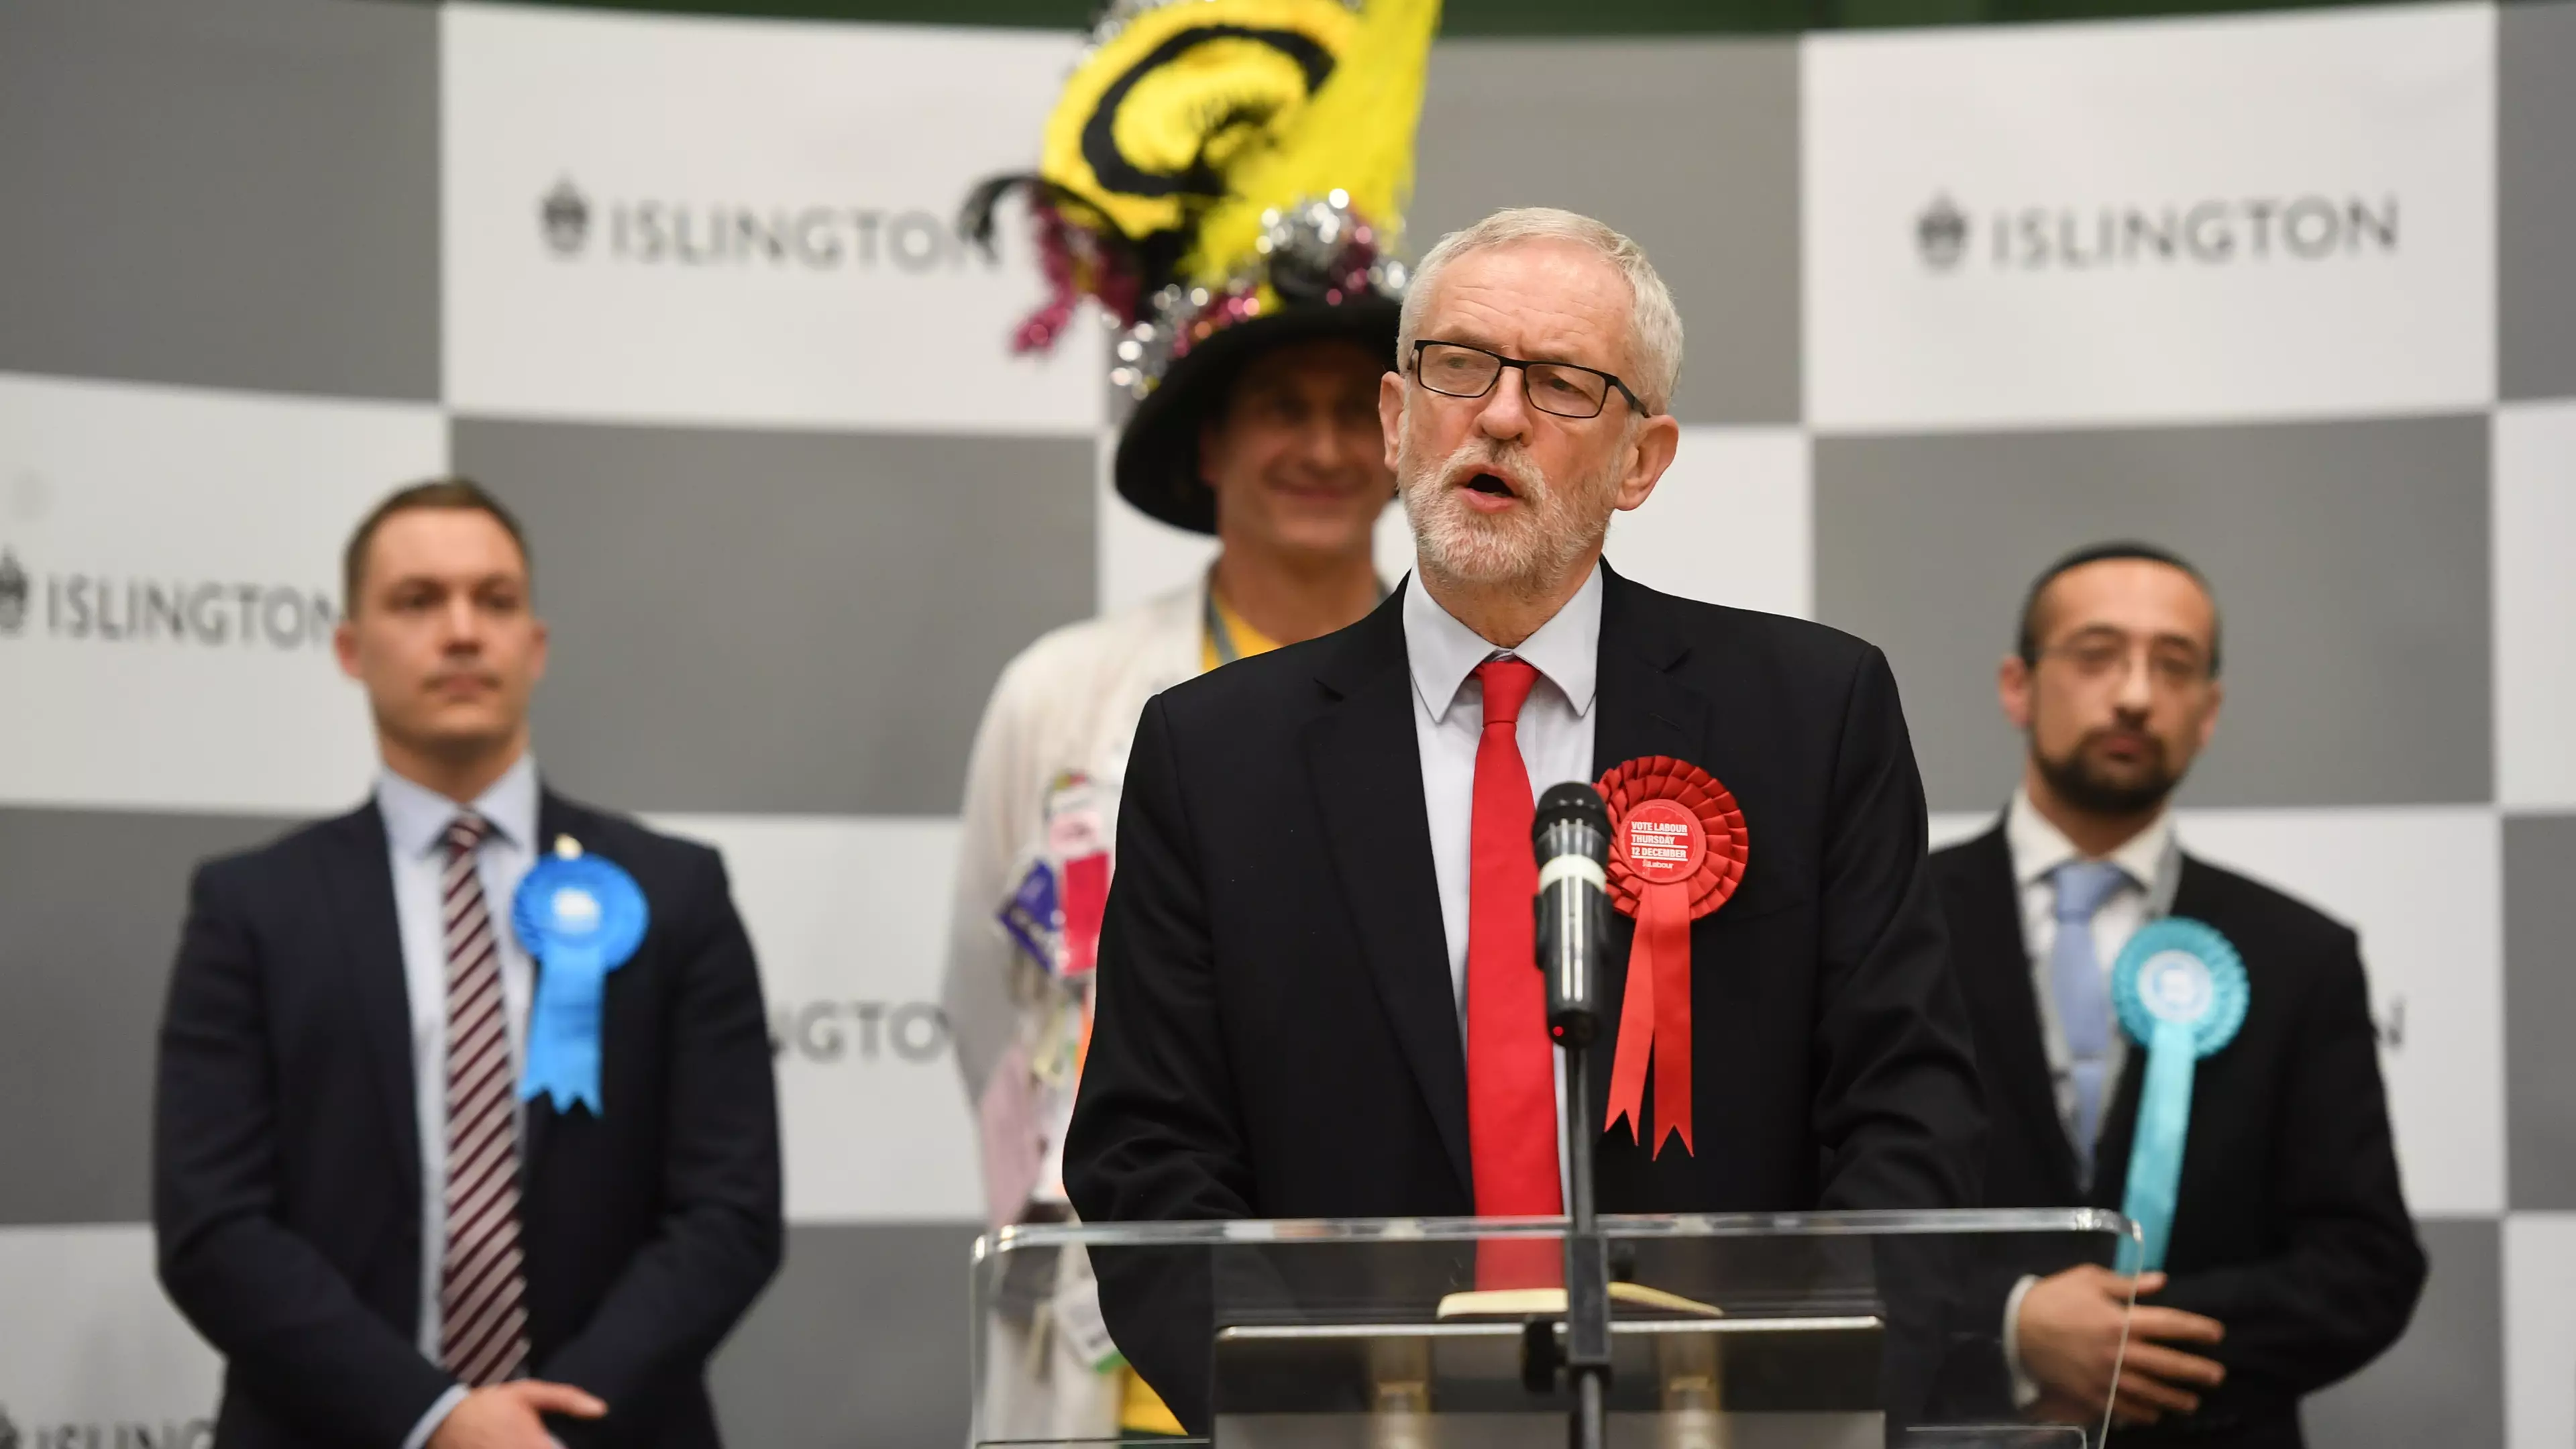 Jeremy Corbyn Will Not Lead The Labour Party At The Next General Election